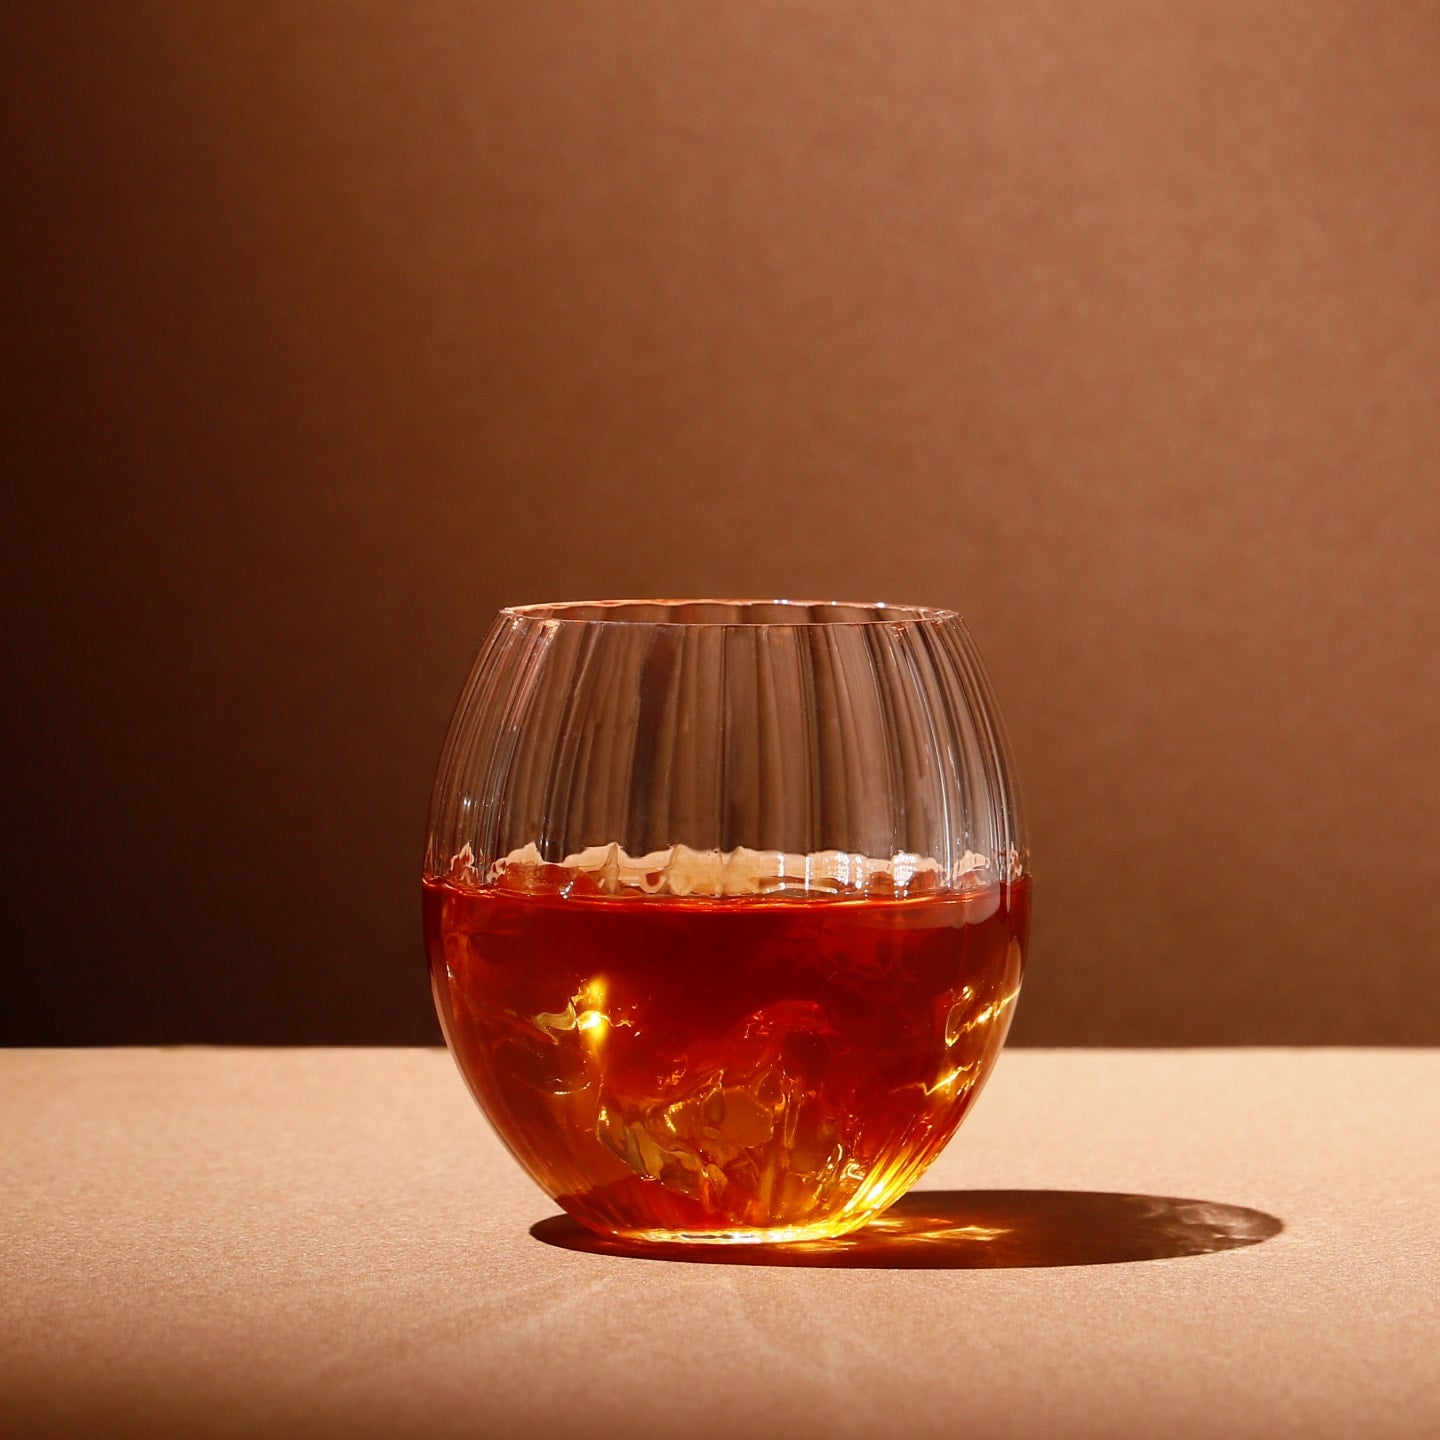 UMESHU THE AMBER Limited Edition 2015